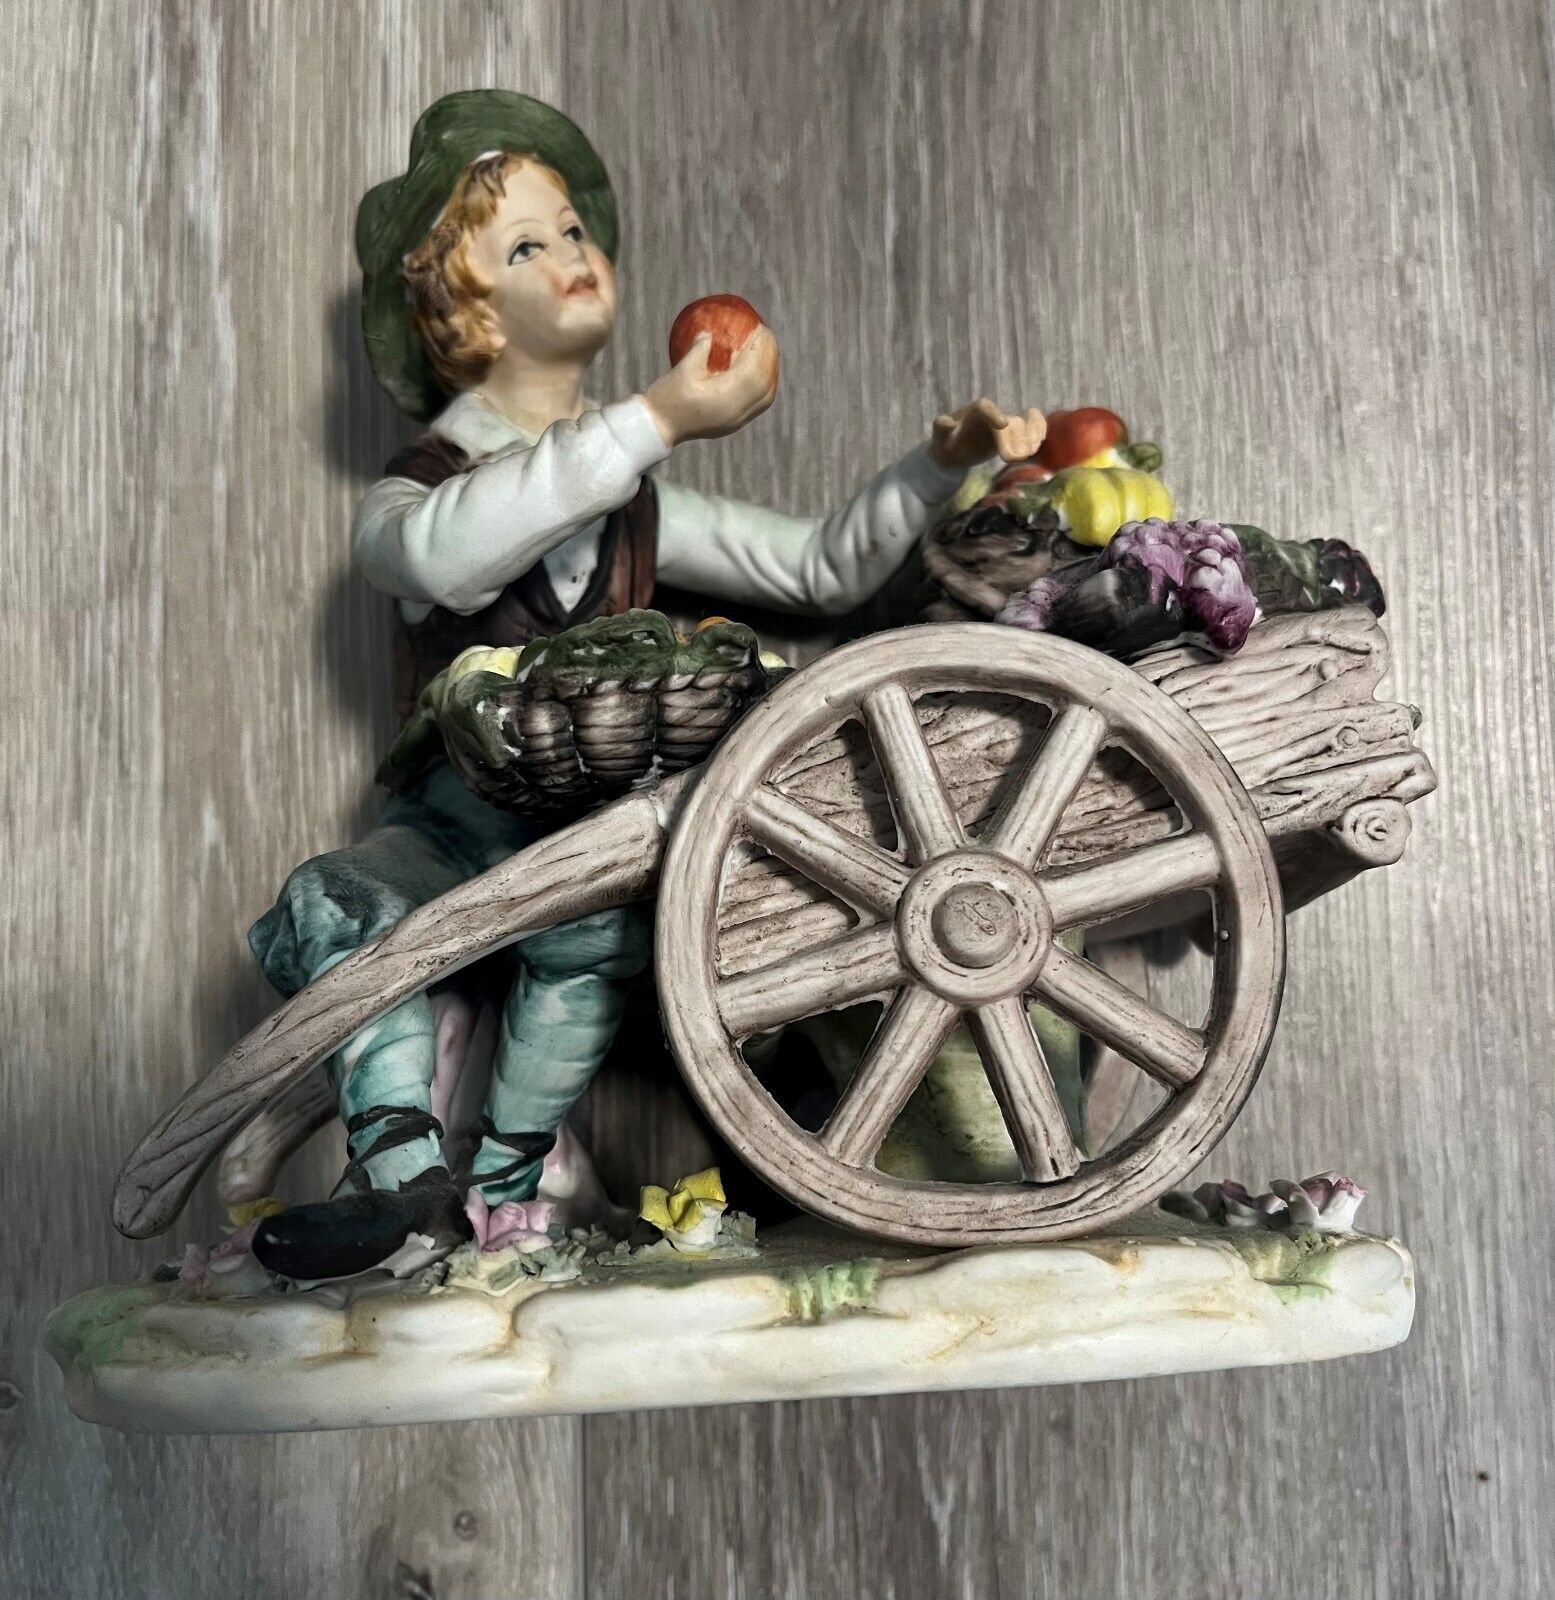 Porcelain/Bisque Colonial Man Figurine With a Cart of Fruit